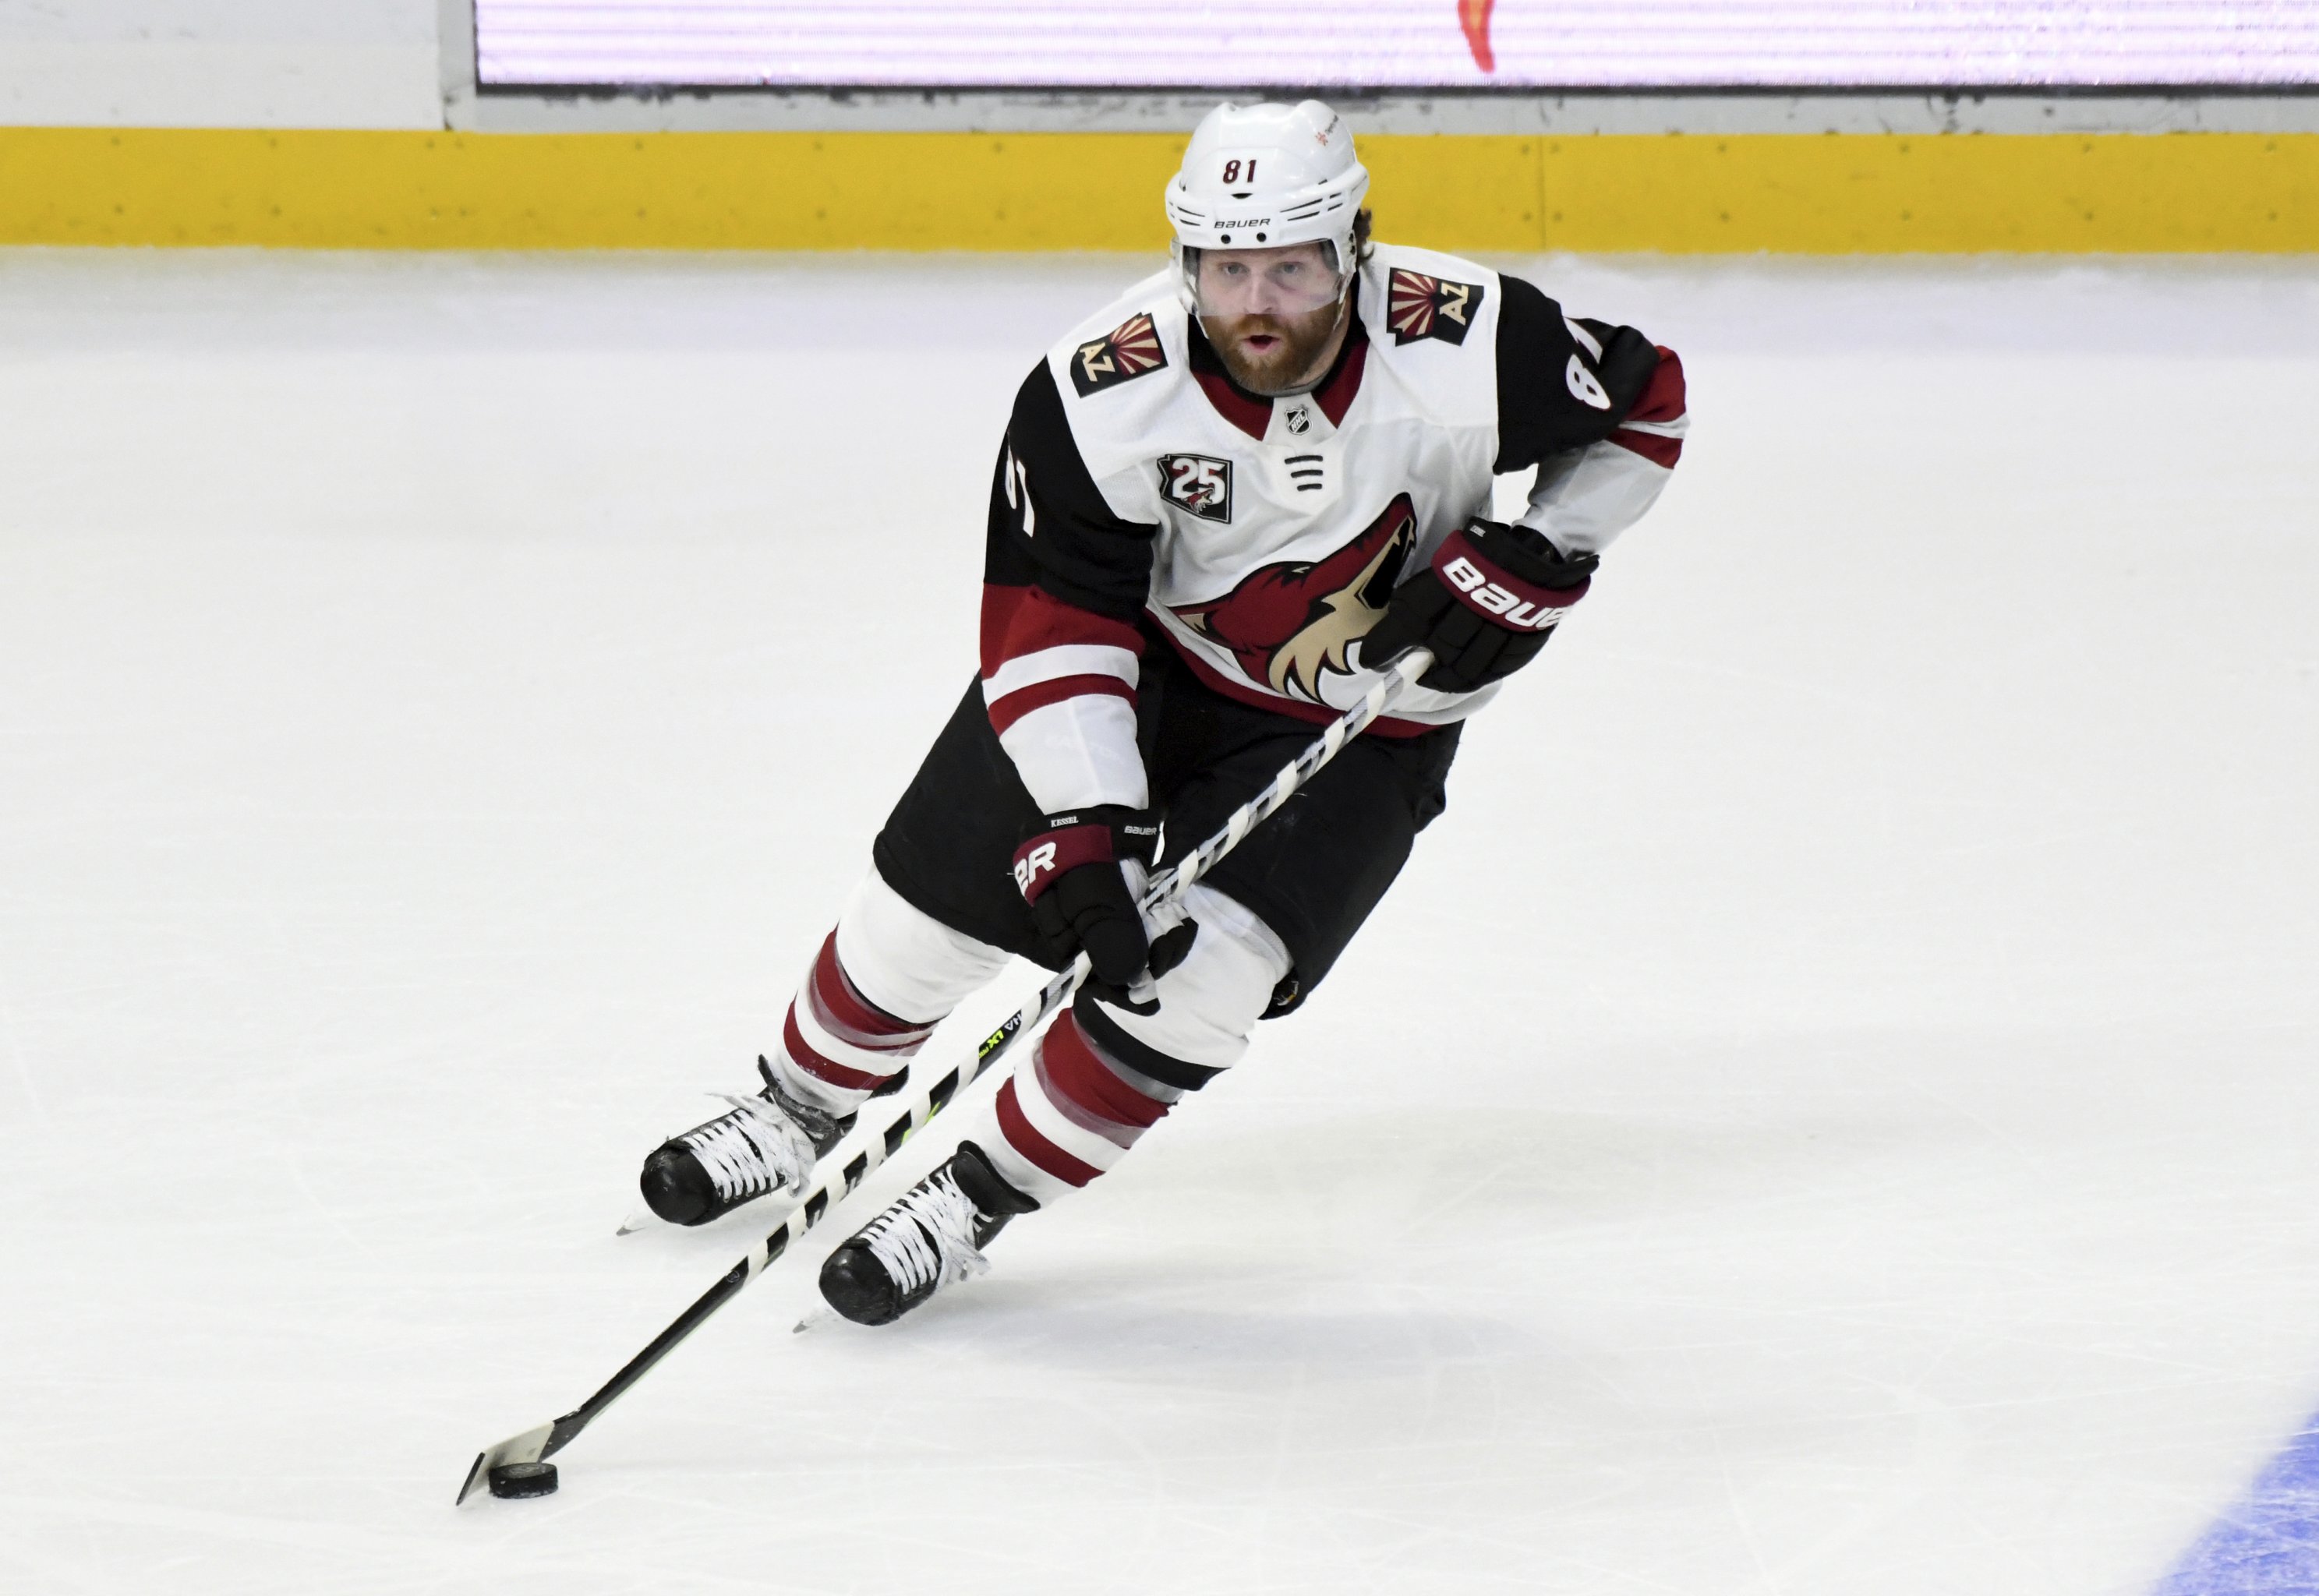 NHL Network on X: The Arizona Coyotes have traded for forward